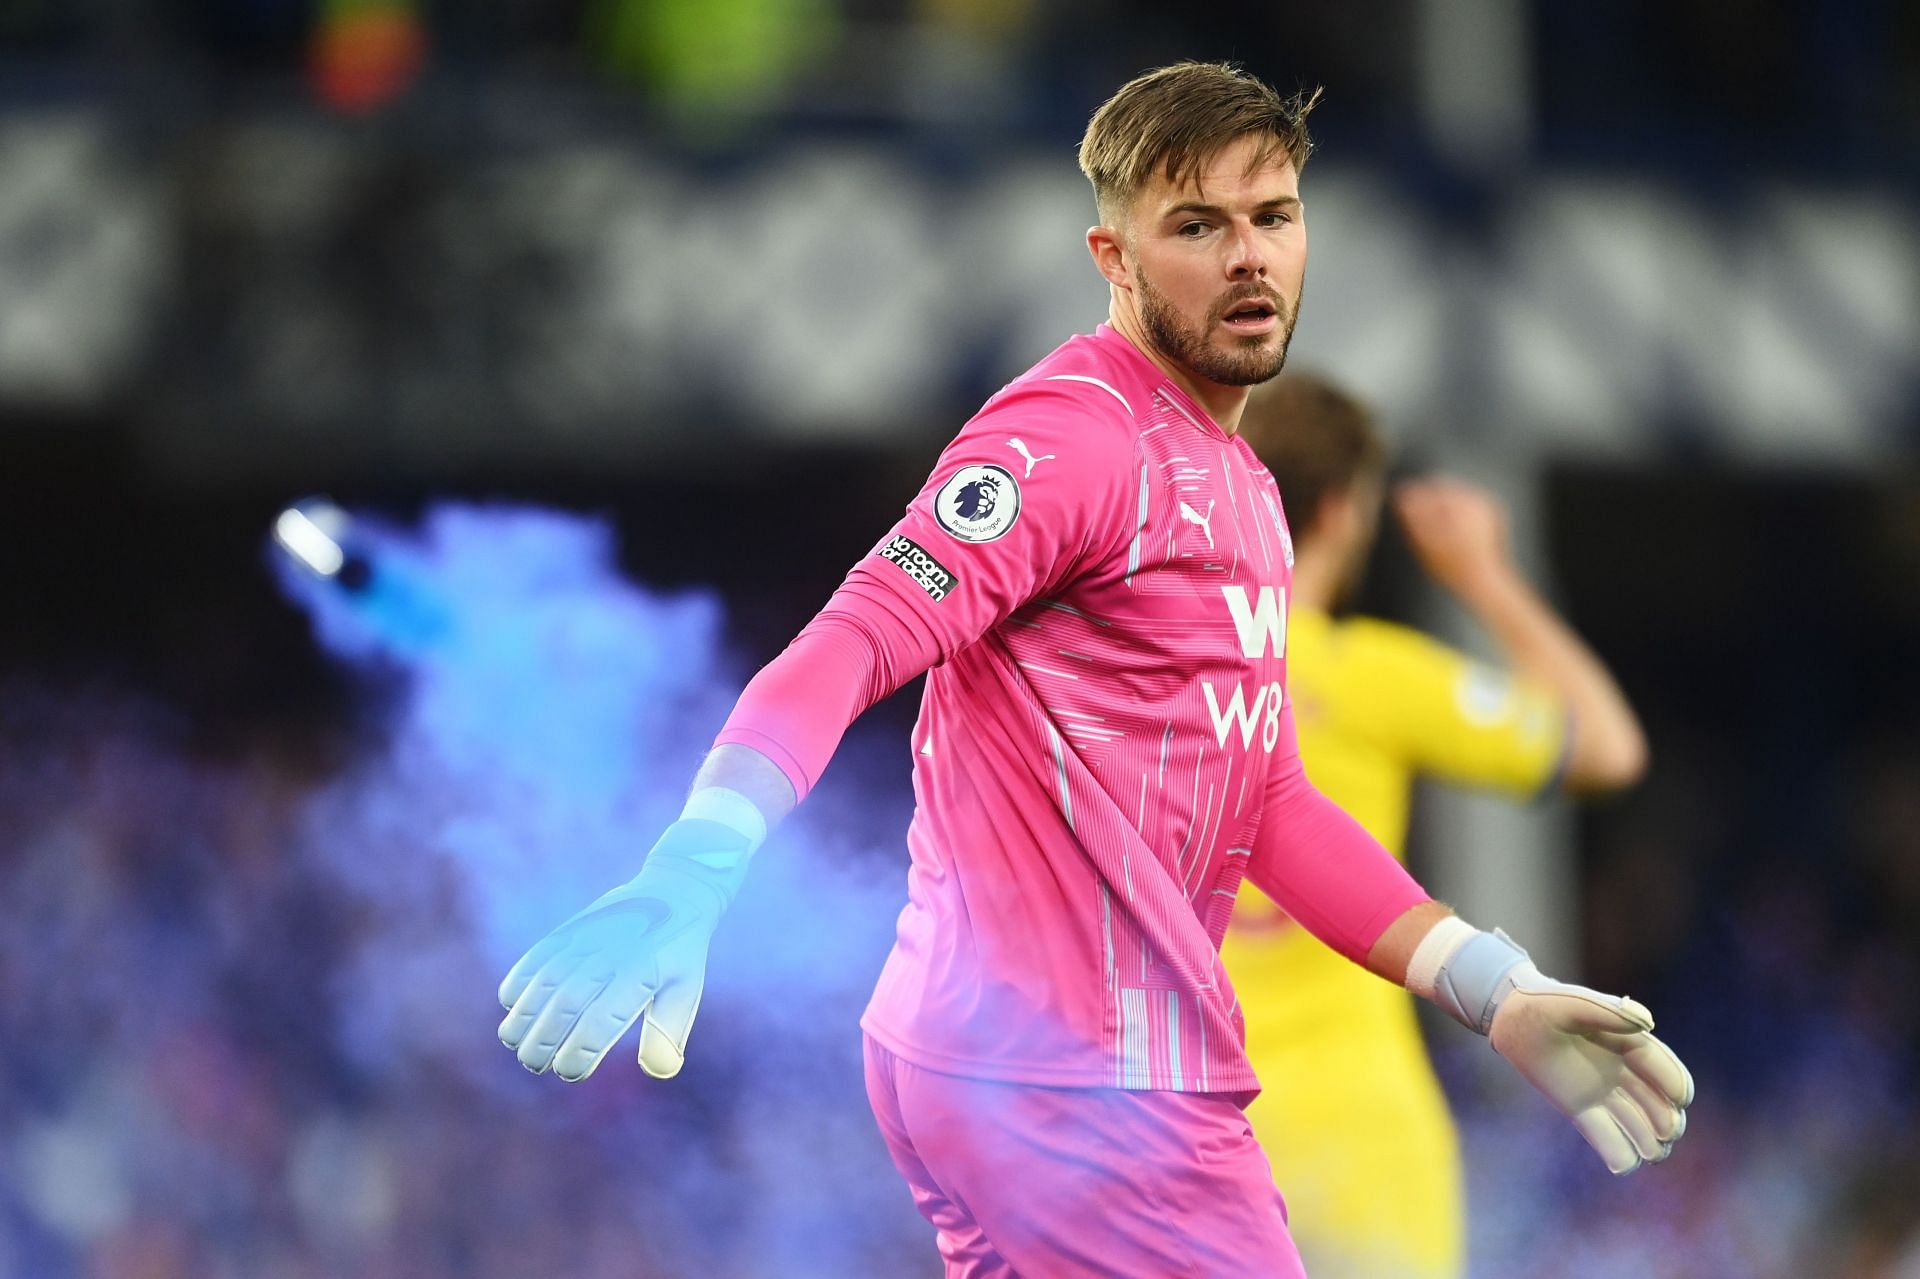 Butland is set to seal a loan move to Manchester United.